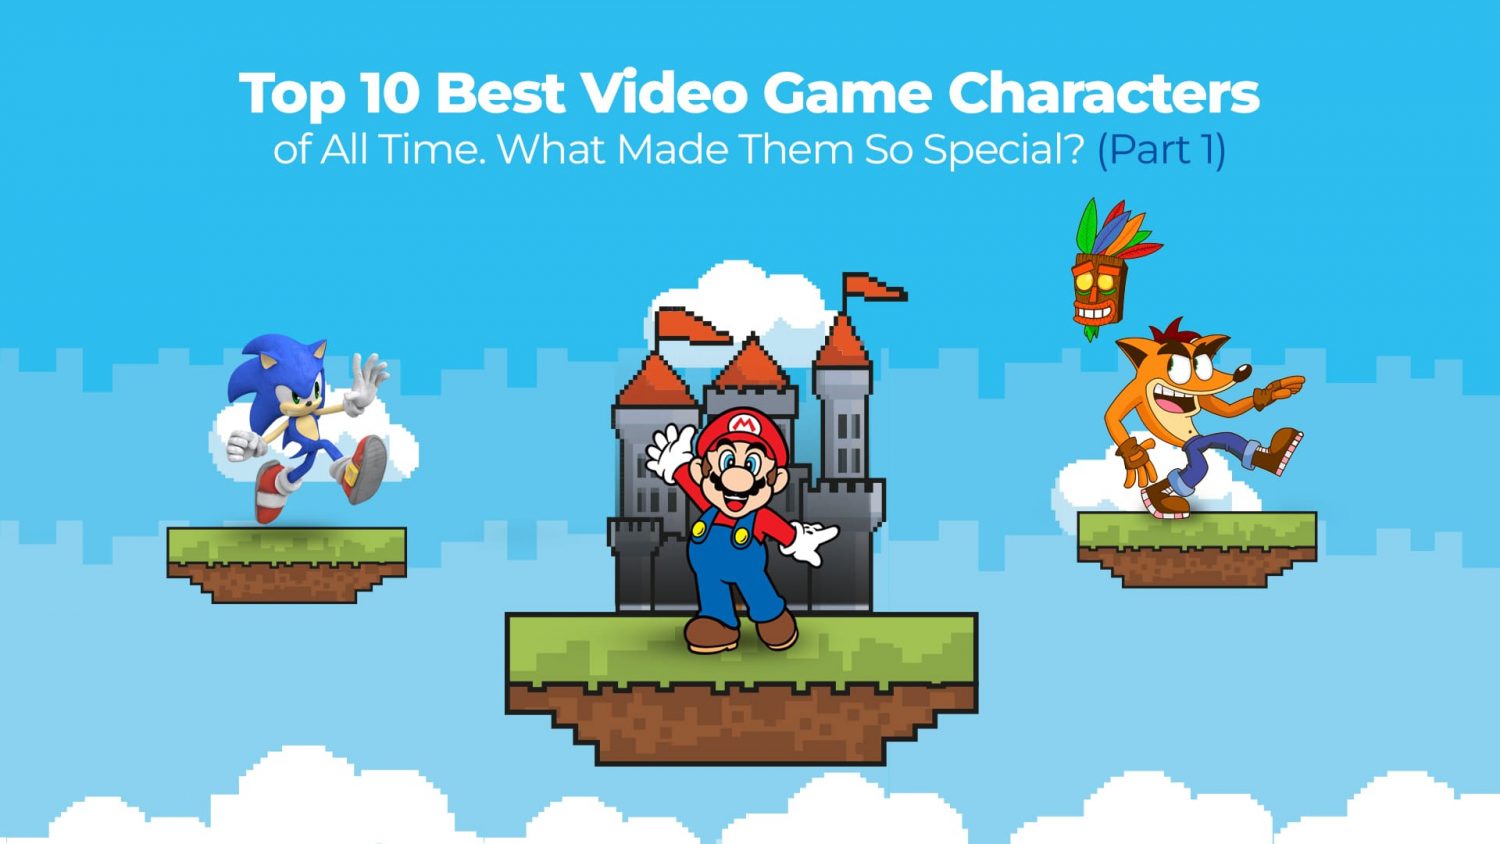 Cover photo of top 10 video game characters